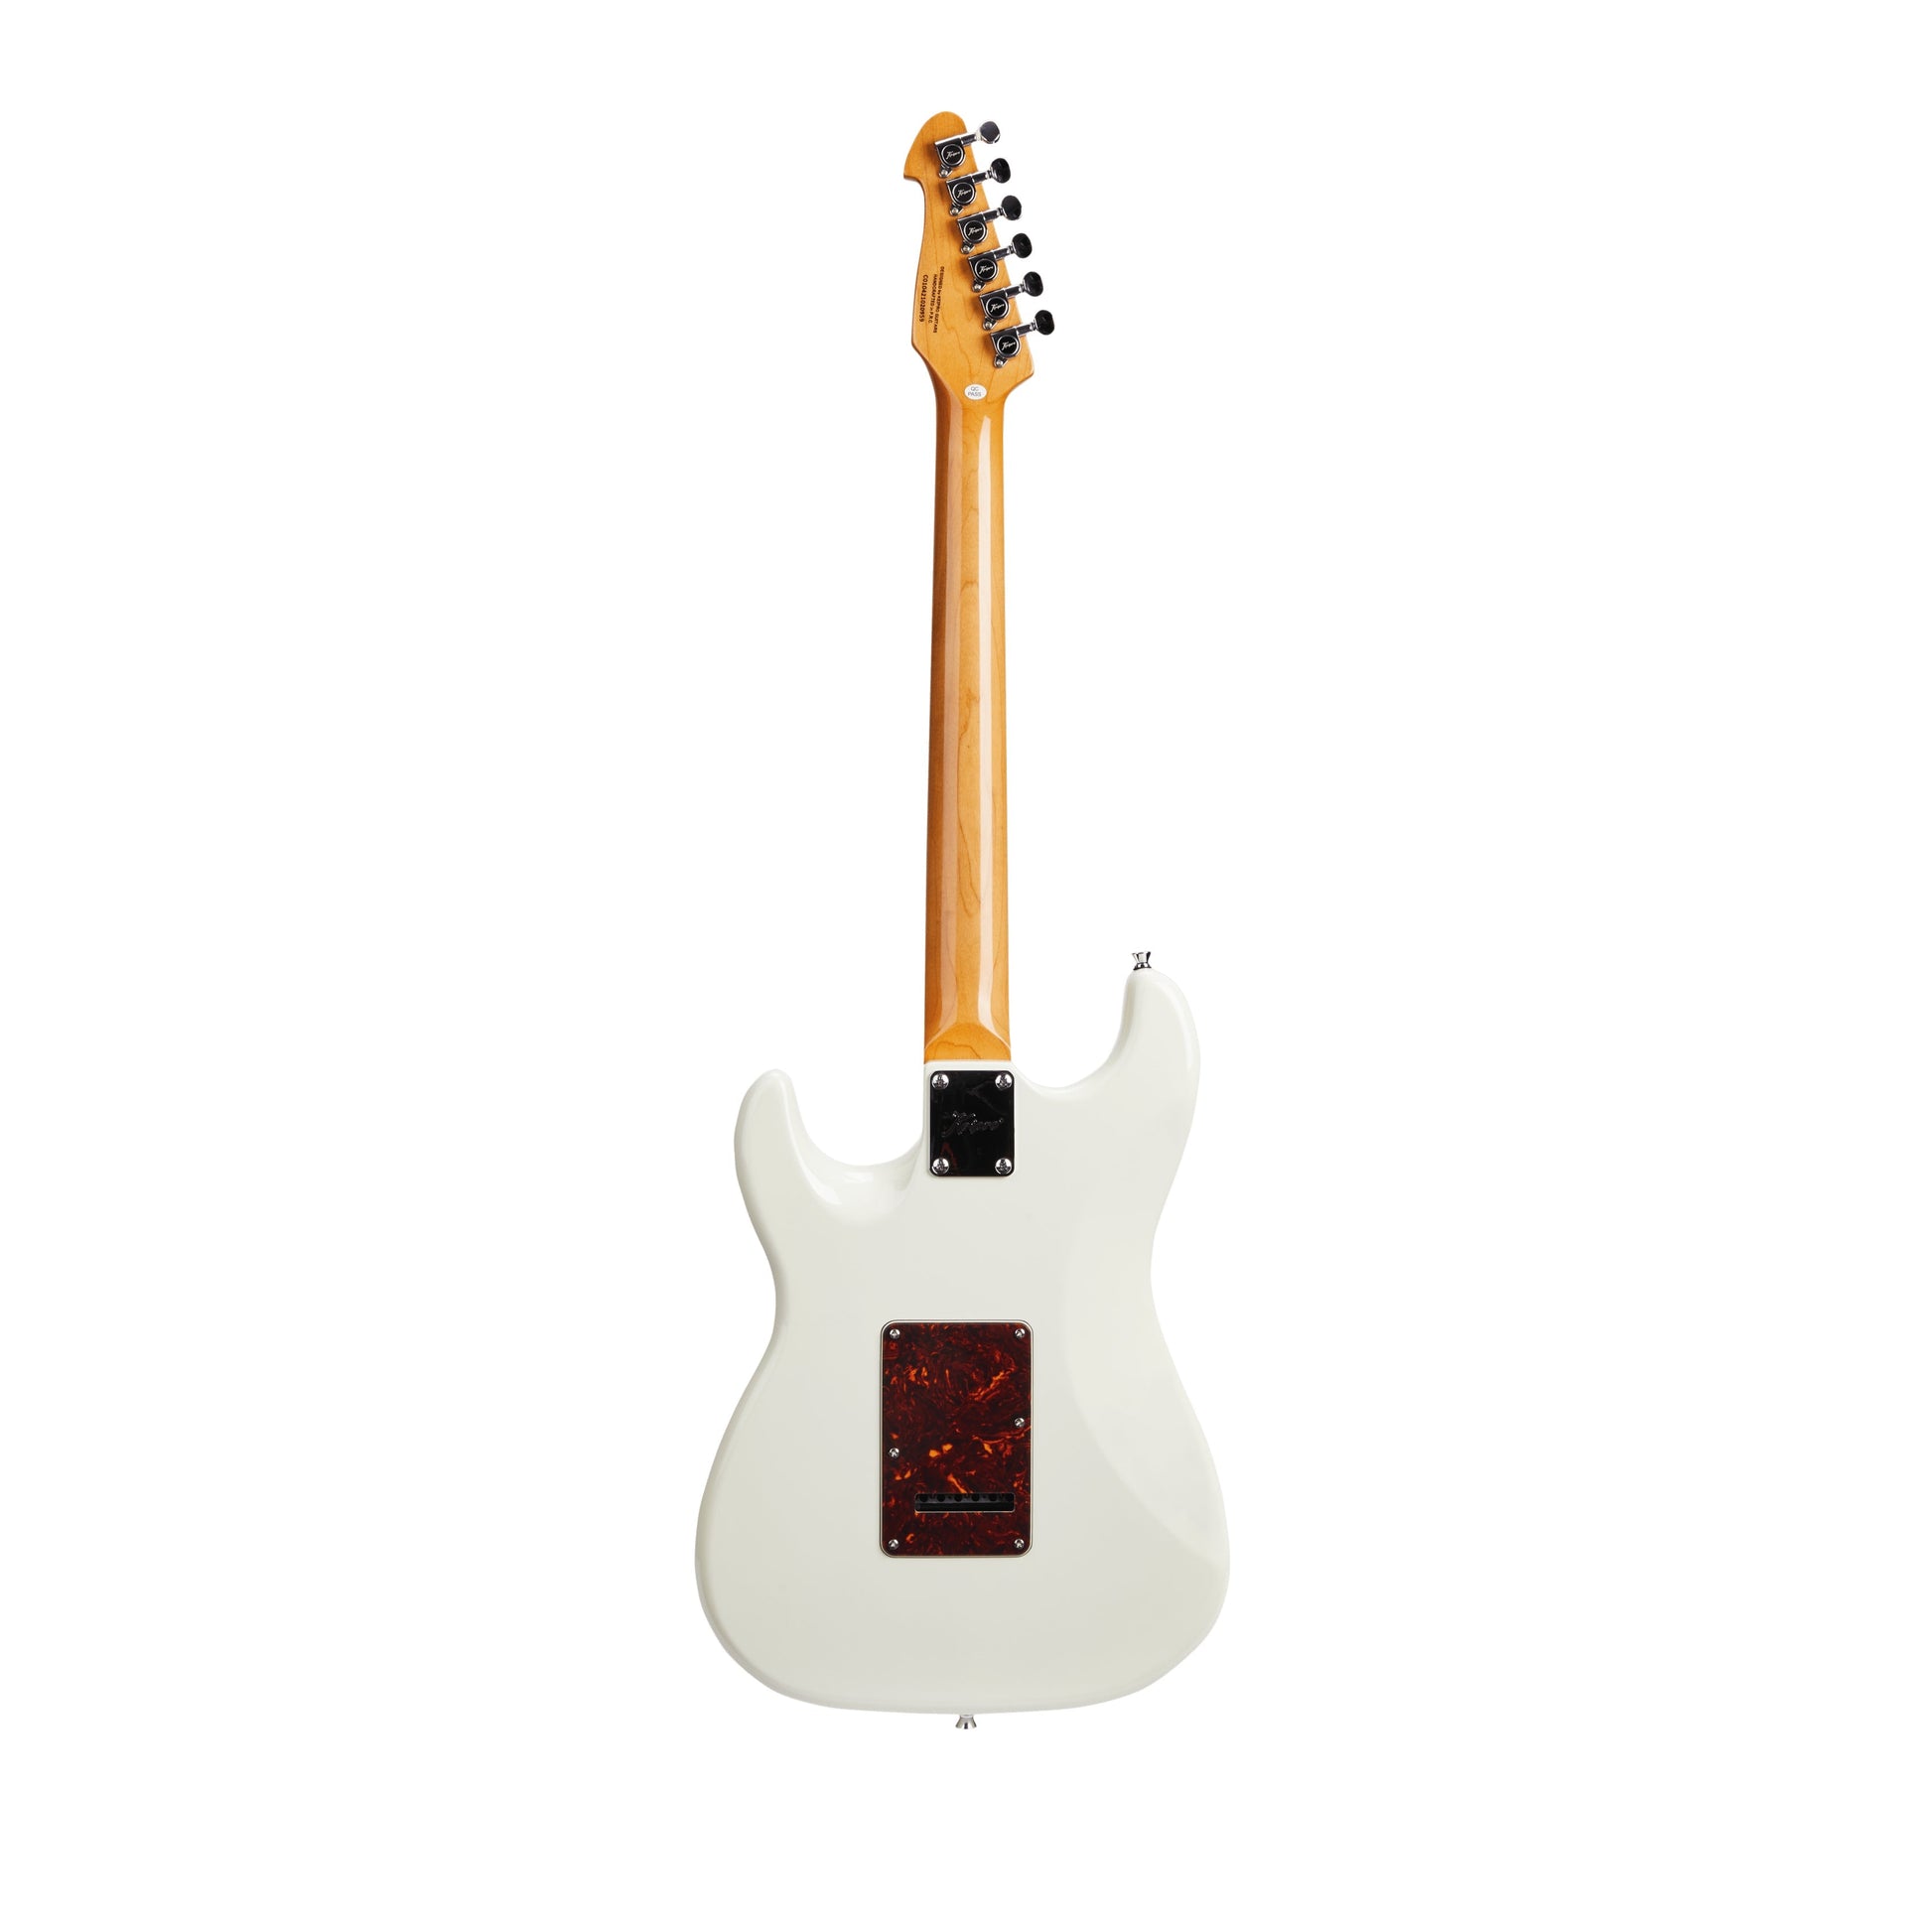 Đàn Guitar Điện Keipro Classic Series S-S-S Rosewood Fingerboard ST, White - Việt Music